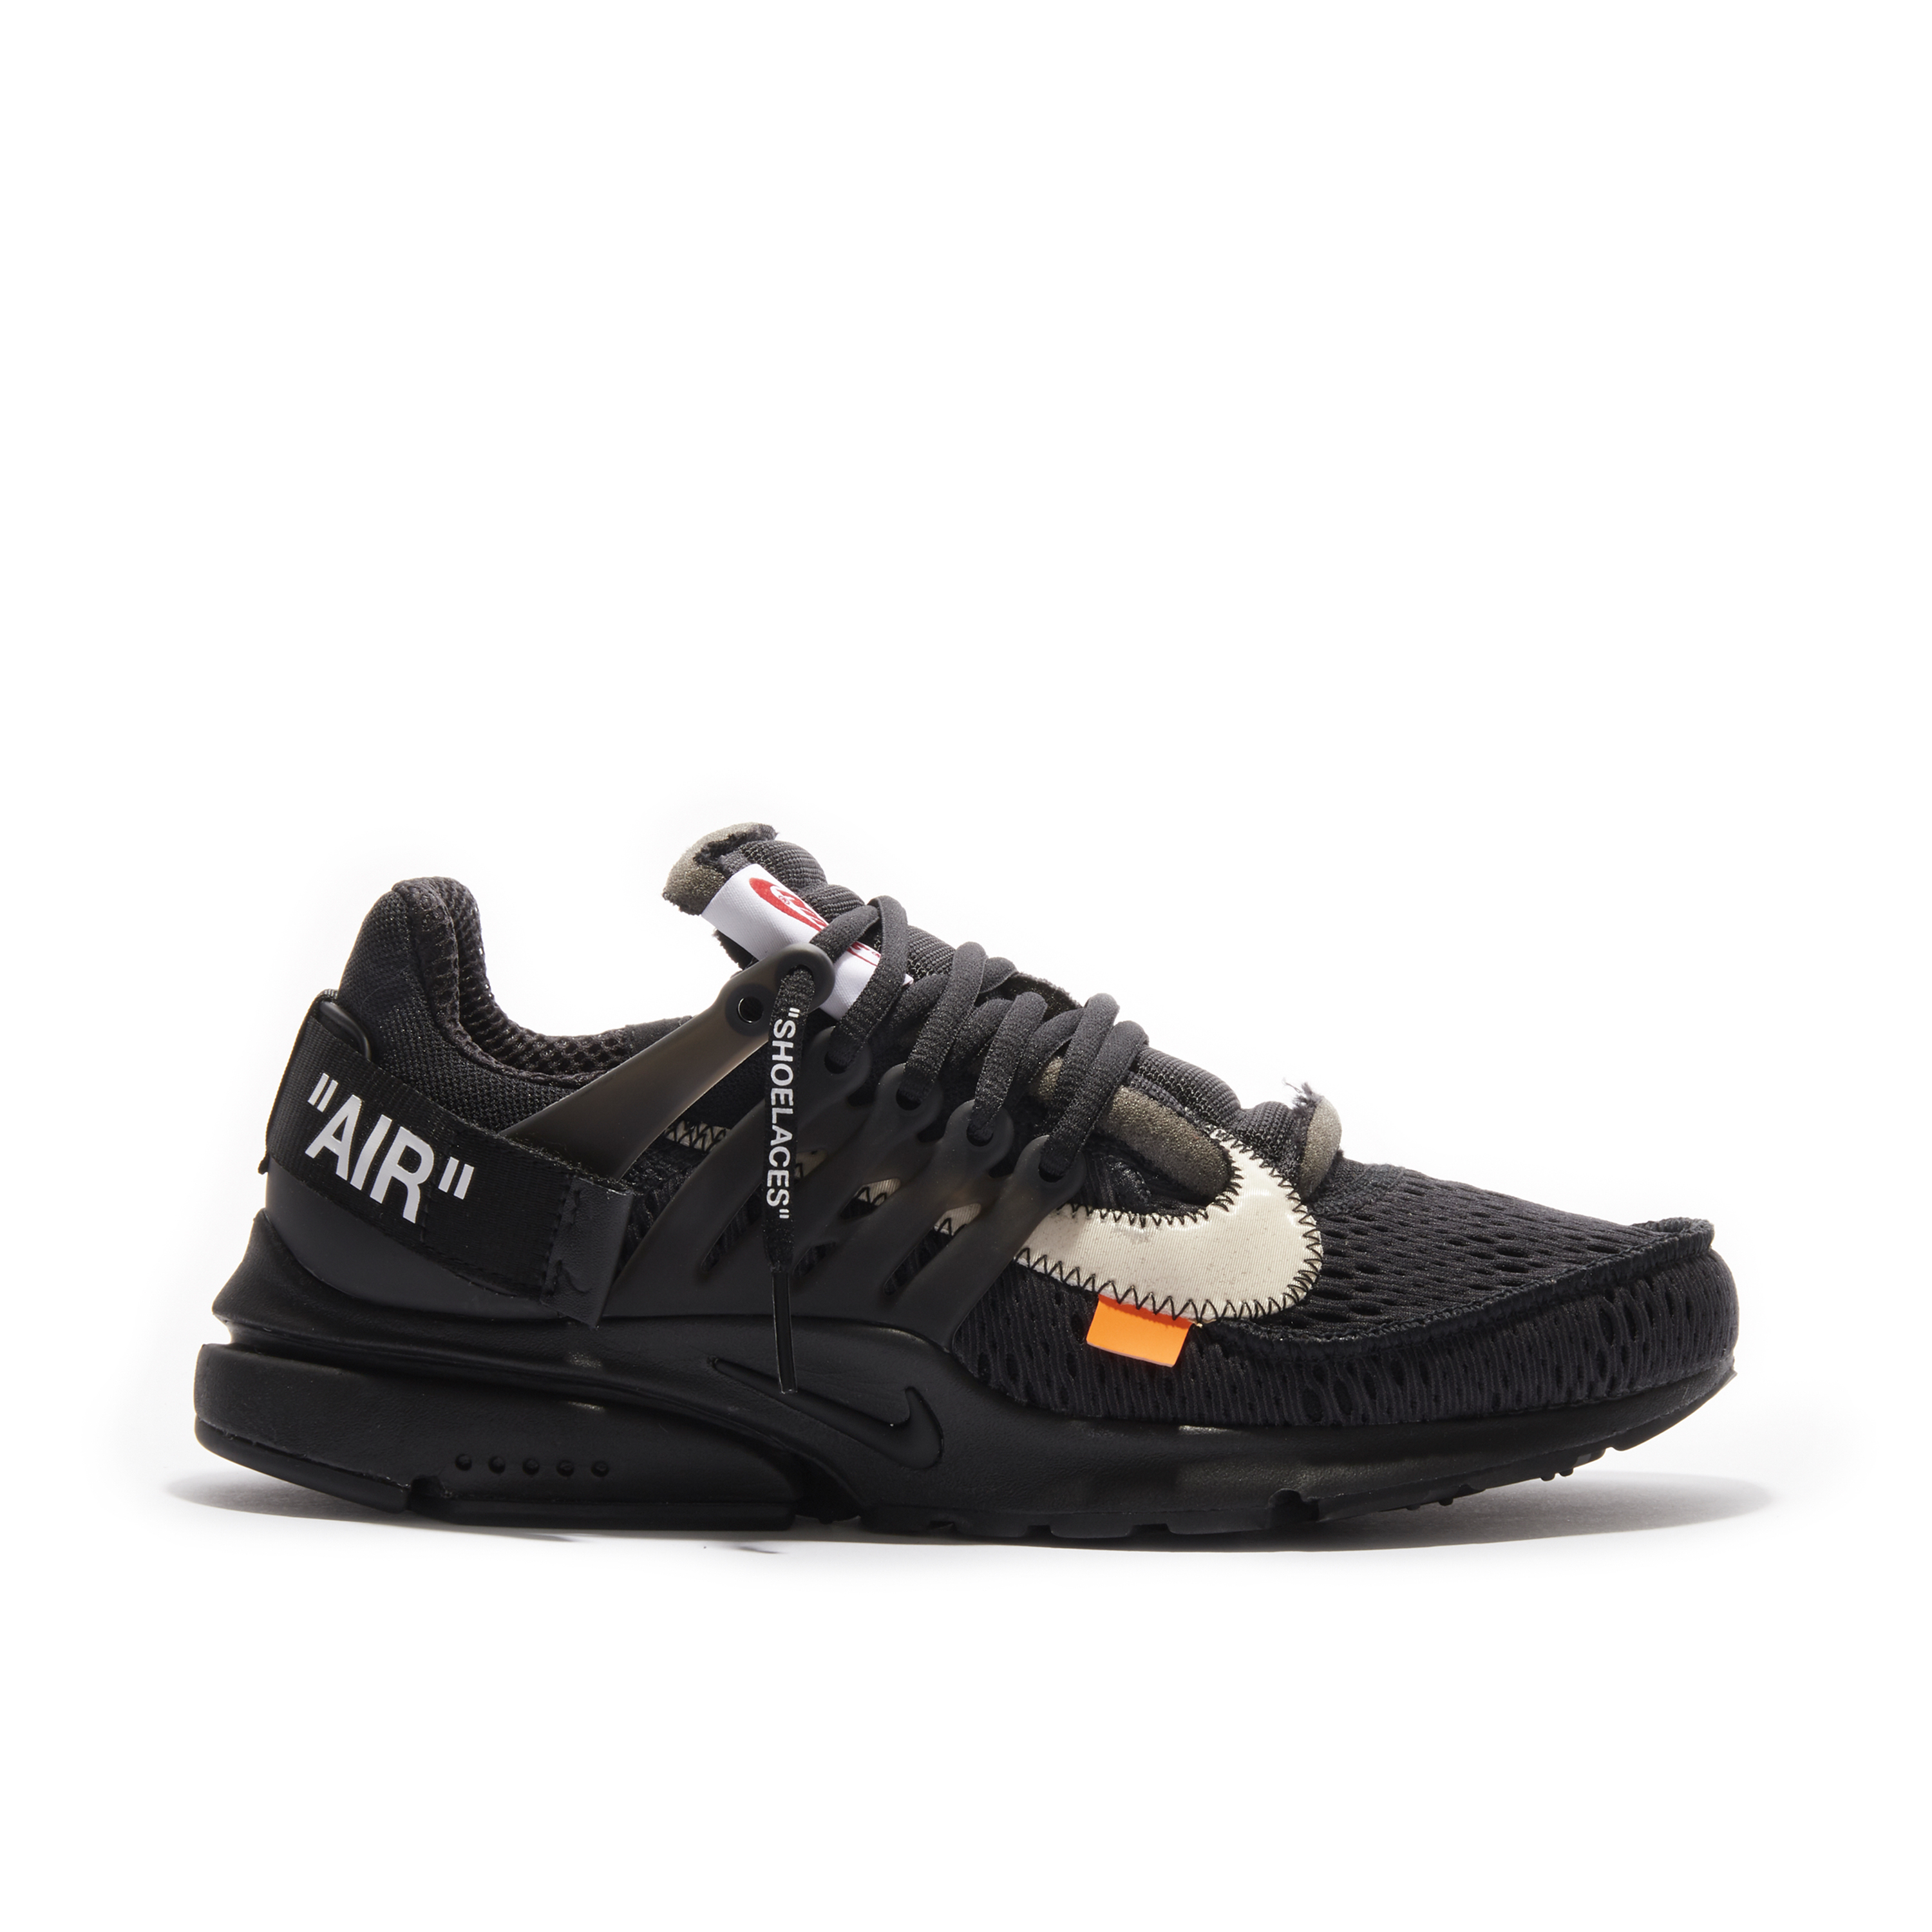 Validering Uplifted Kompleks Air Presto Black x Off-White | AA3830-002 | Laced